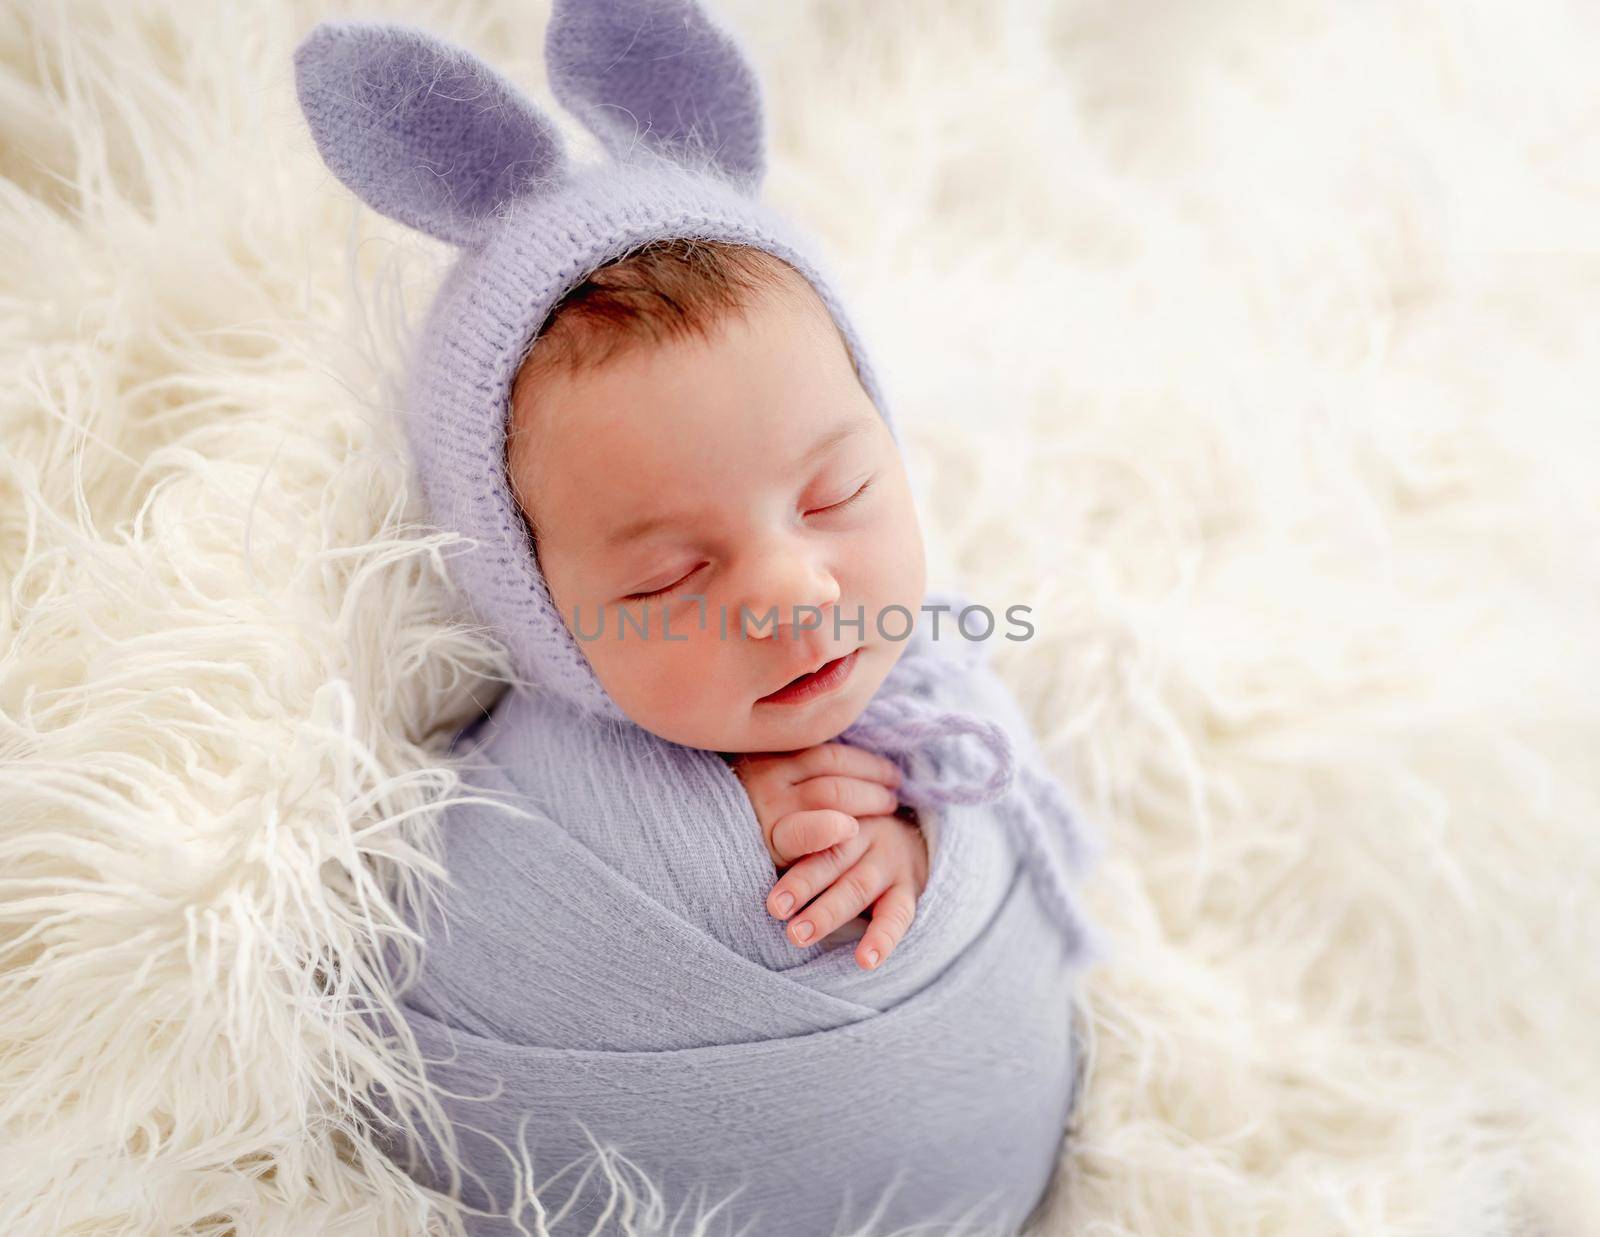 Little beautiful newborn baby girl swaadled in fabric and wearing hat with bunny ears sleeping on fur during studio photoshoot. Cute infant child kid napping